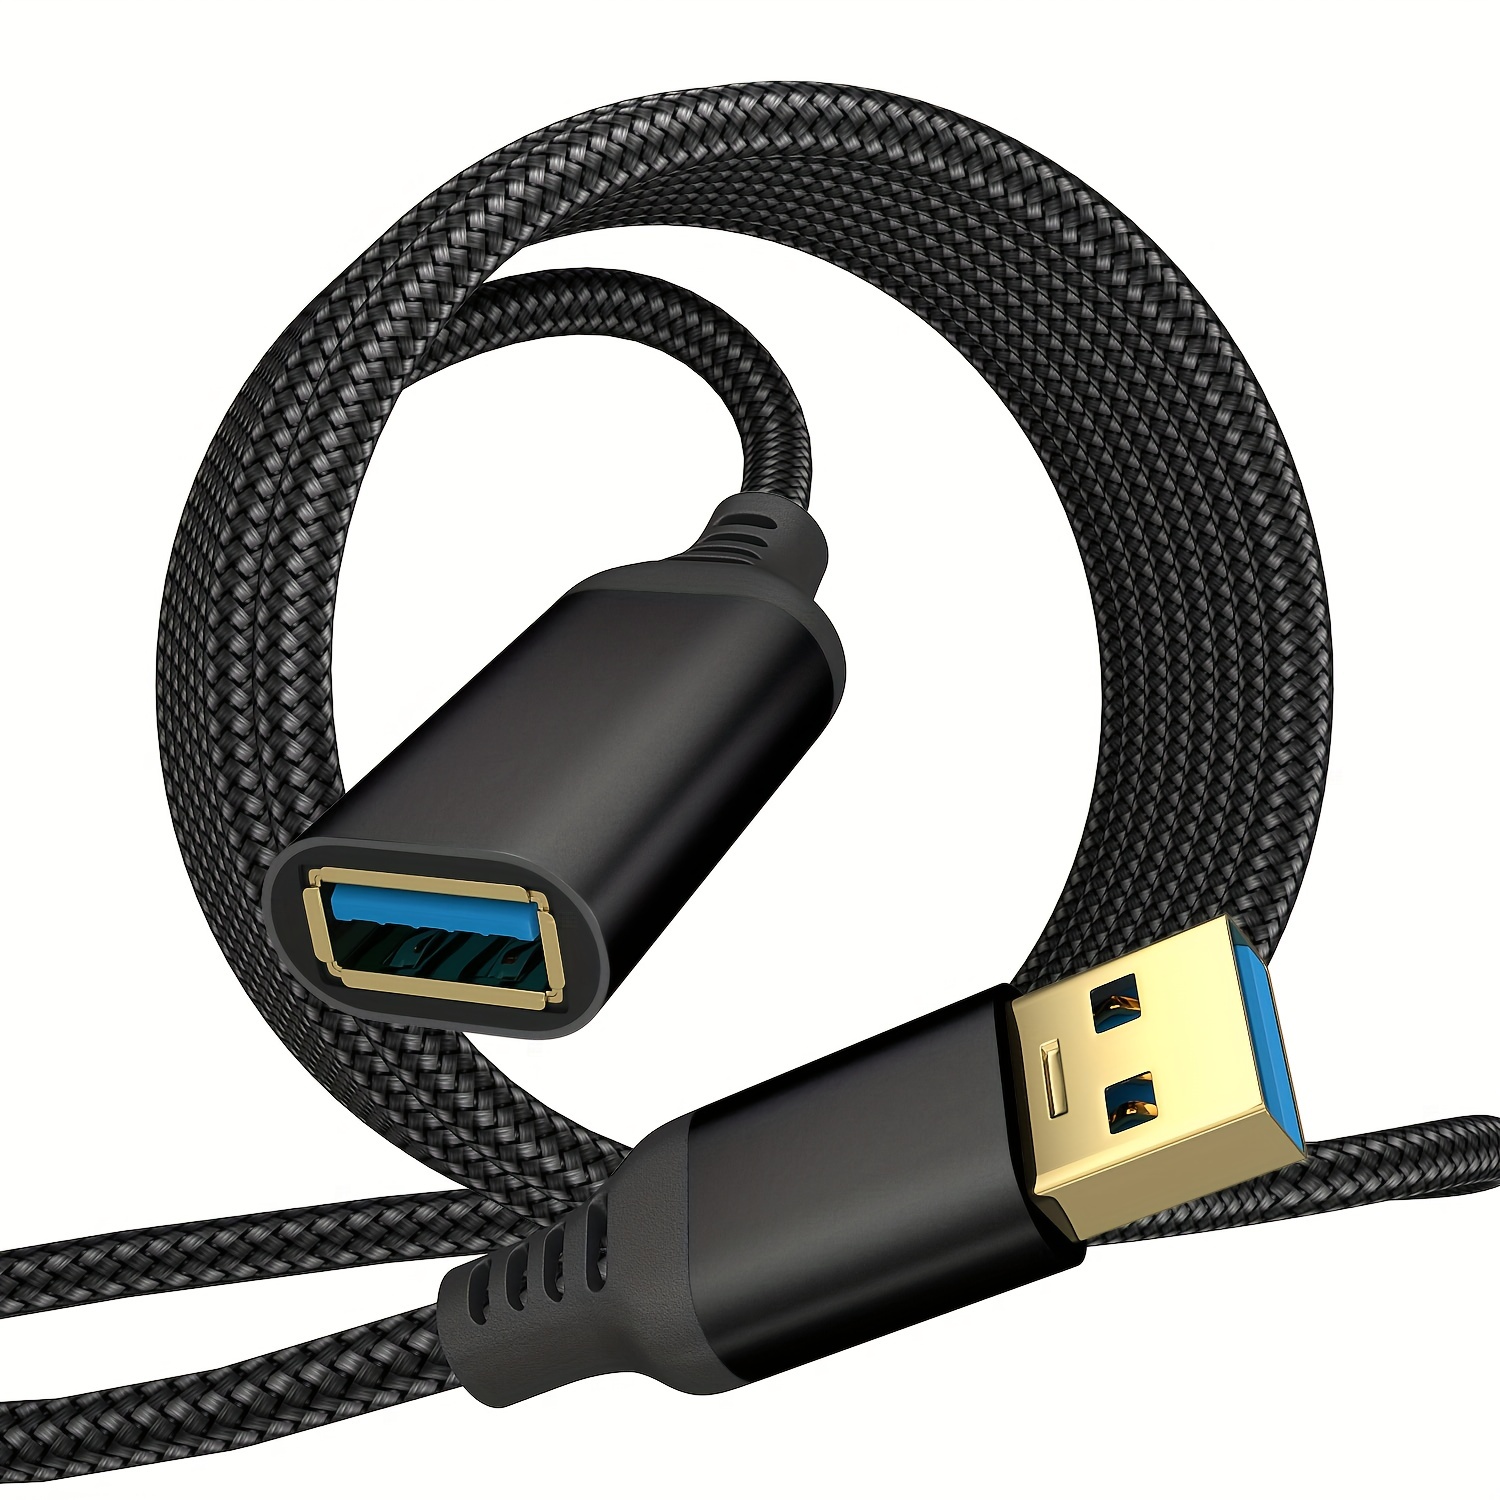 RAMPOW---Cable-USB-C-a-USB-3.0-(3,3ft)